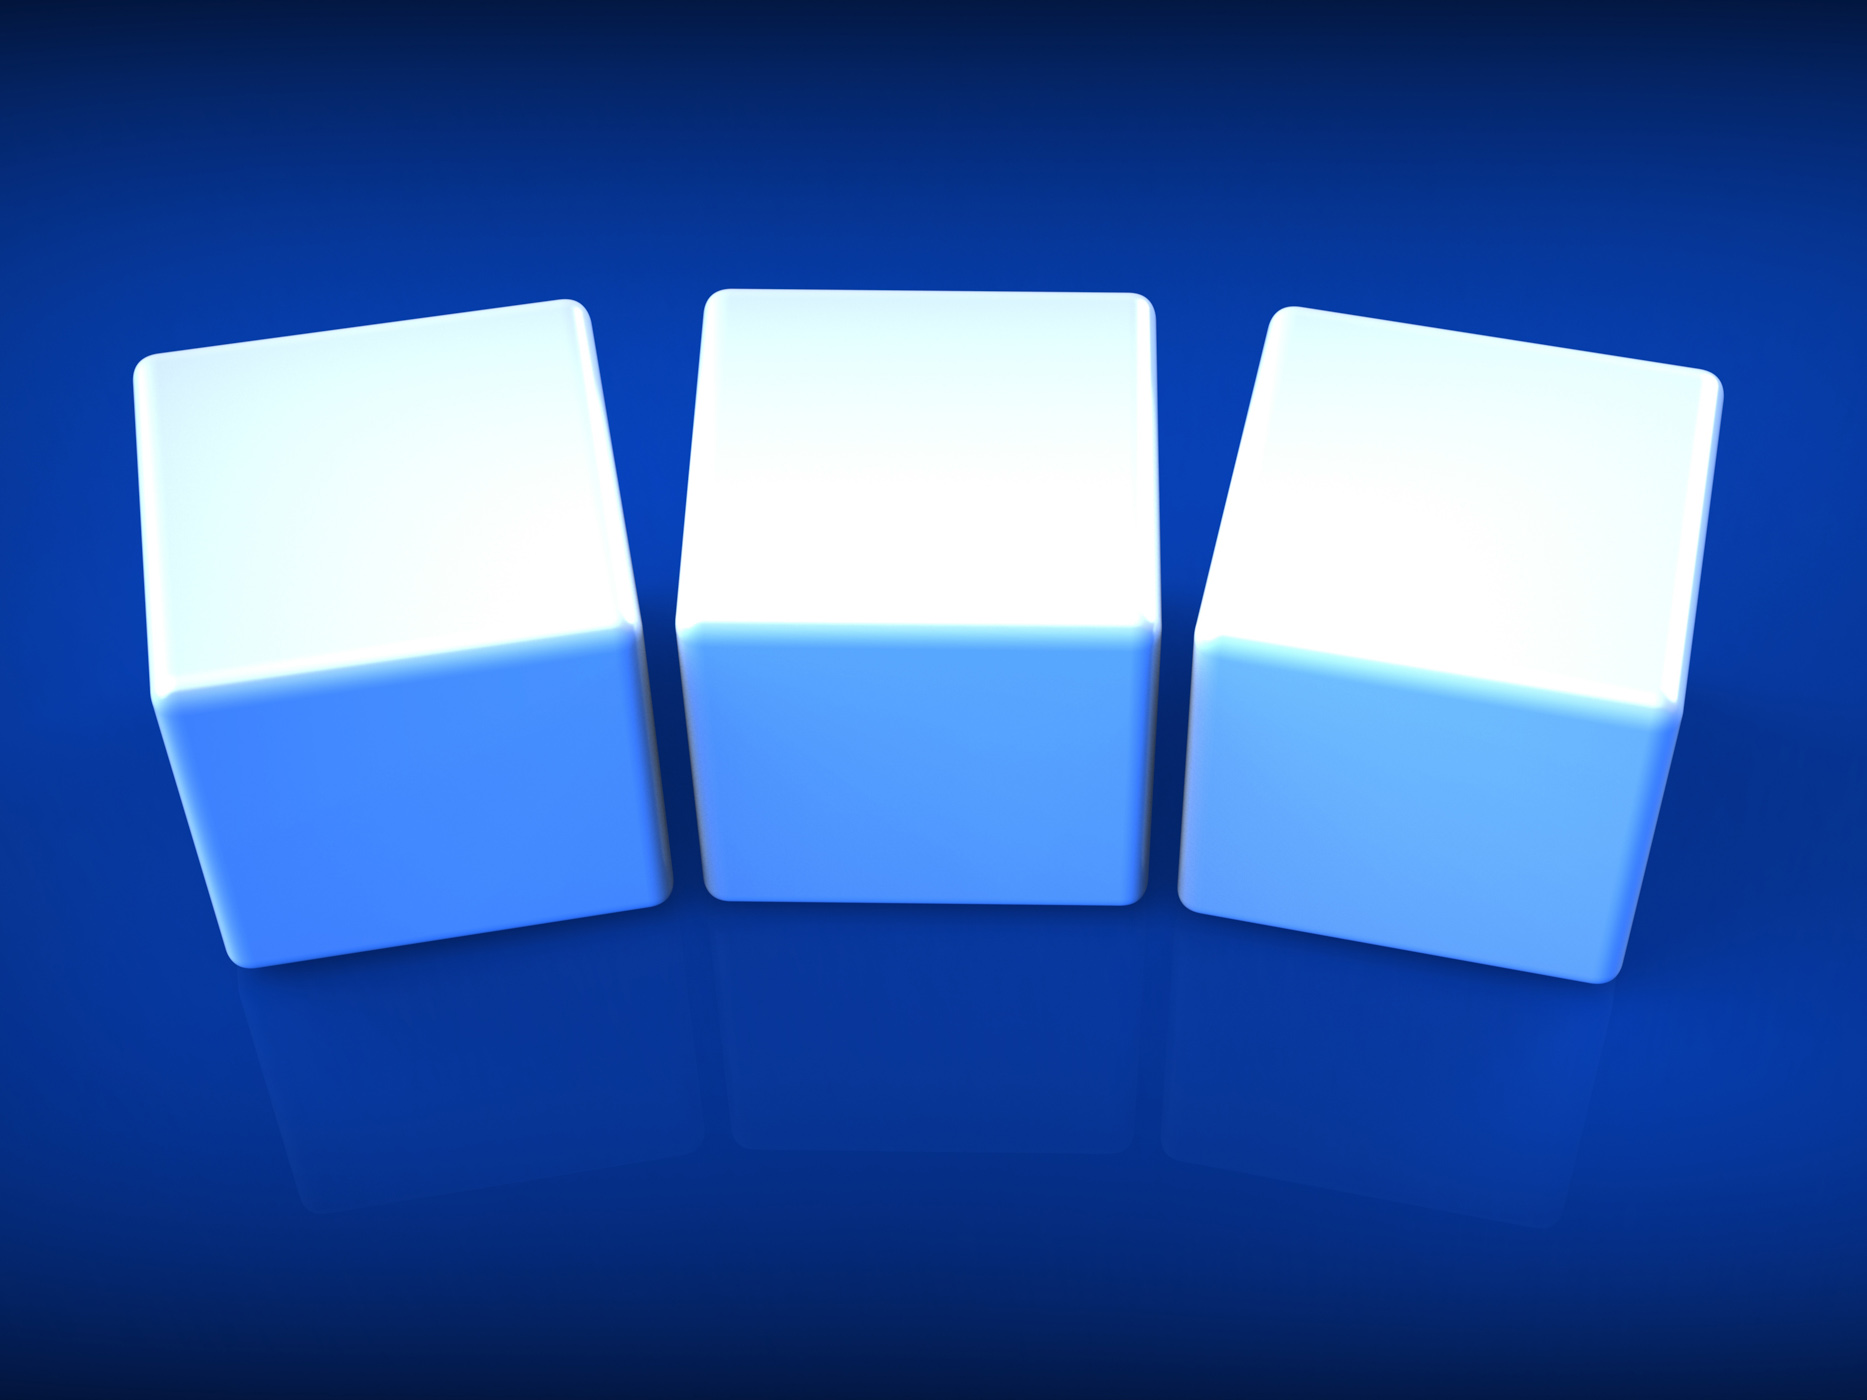 Three Blank Dice Show Copyspace For 3 Letter Word, 3, Blank, Copy-space, Copyspace, HQ Photo